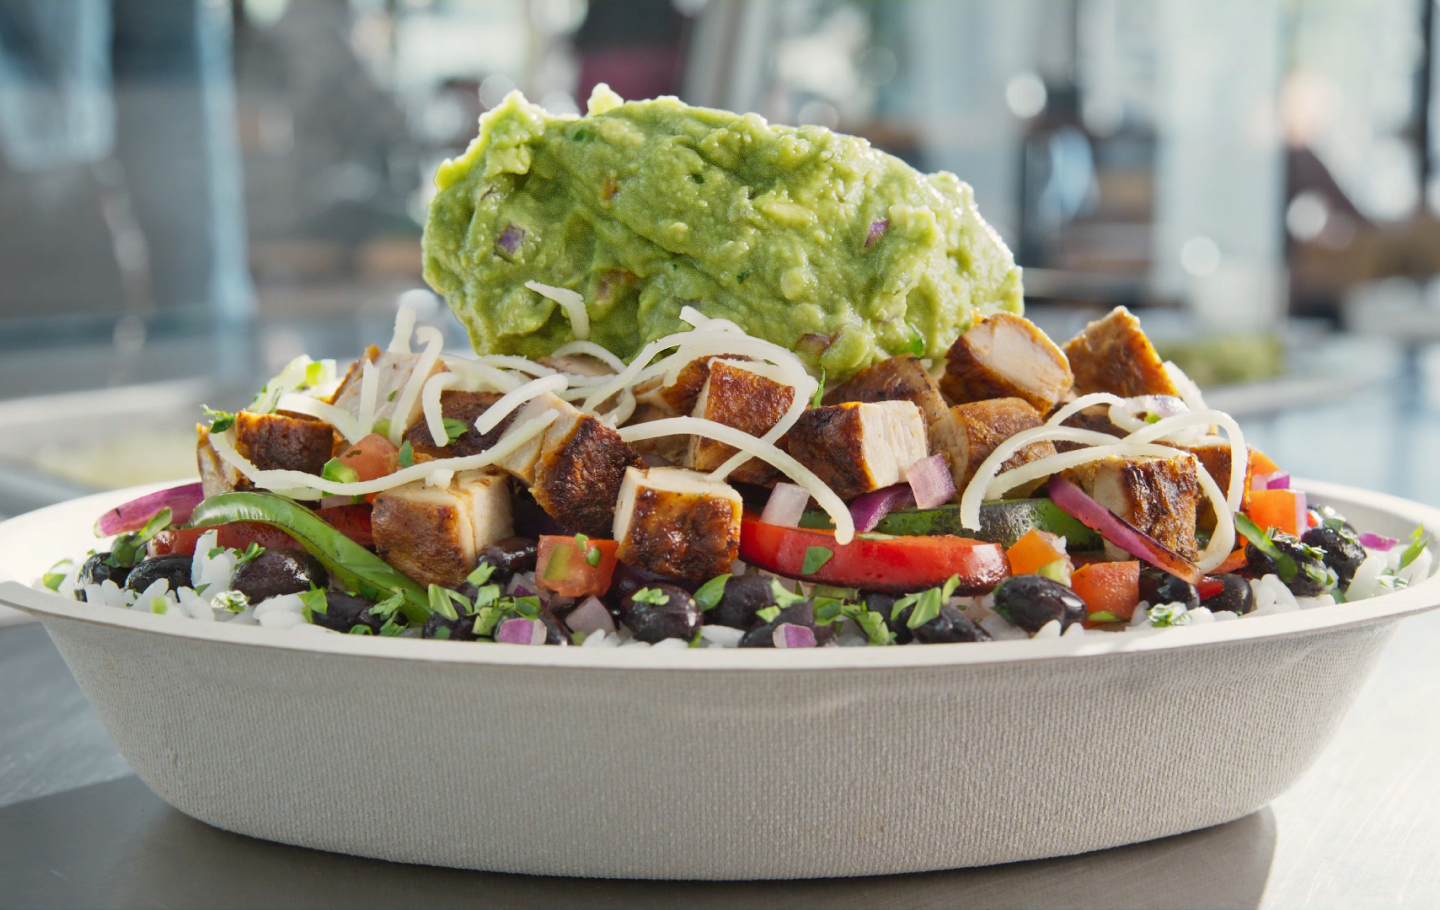 A Chipotle Burrito Bowl with black beans, fajita veggies, adobo chicken, fresh tomato salsa, monterey jack shredded cheese, being topped with hand-mashed guac.